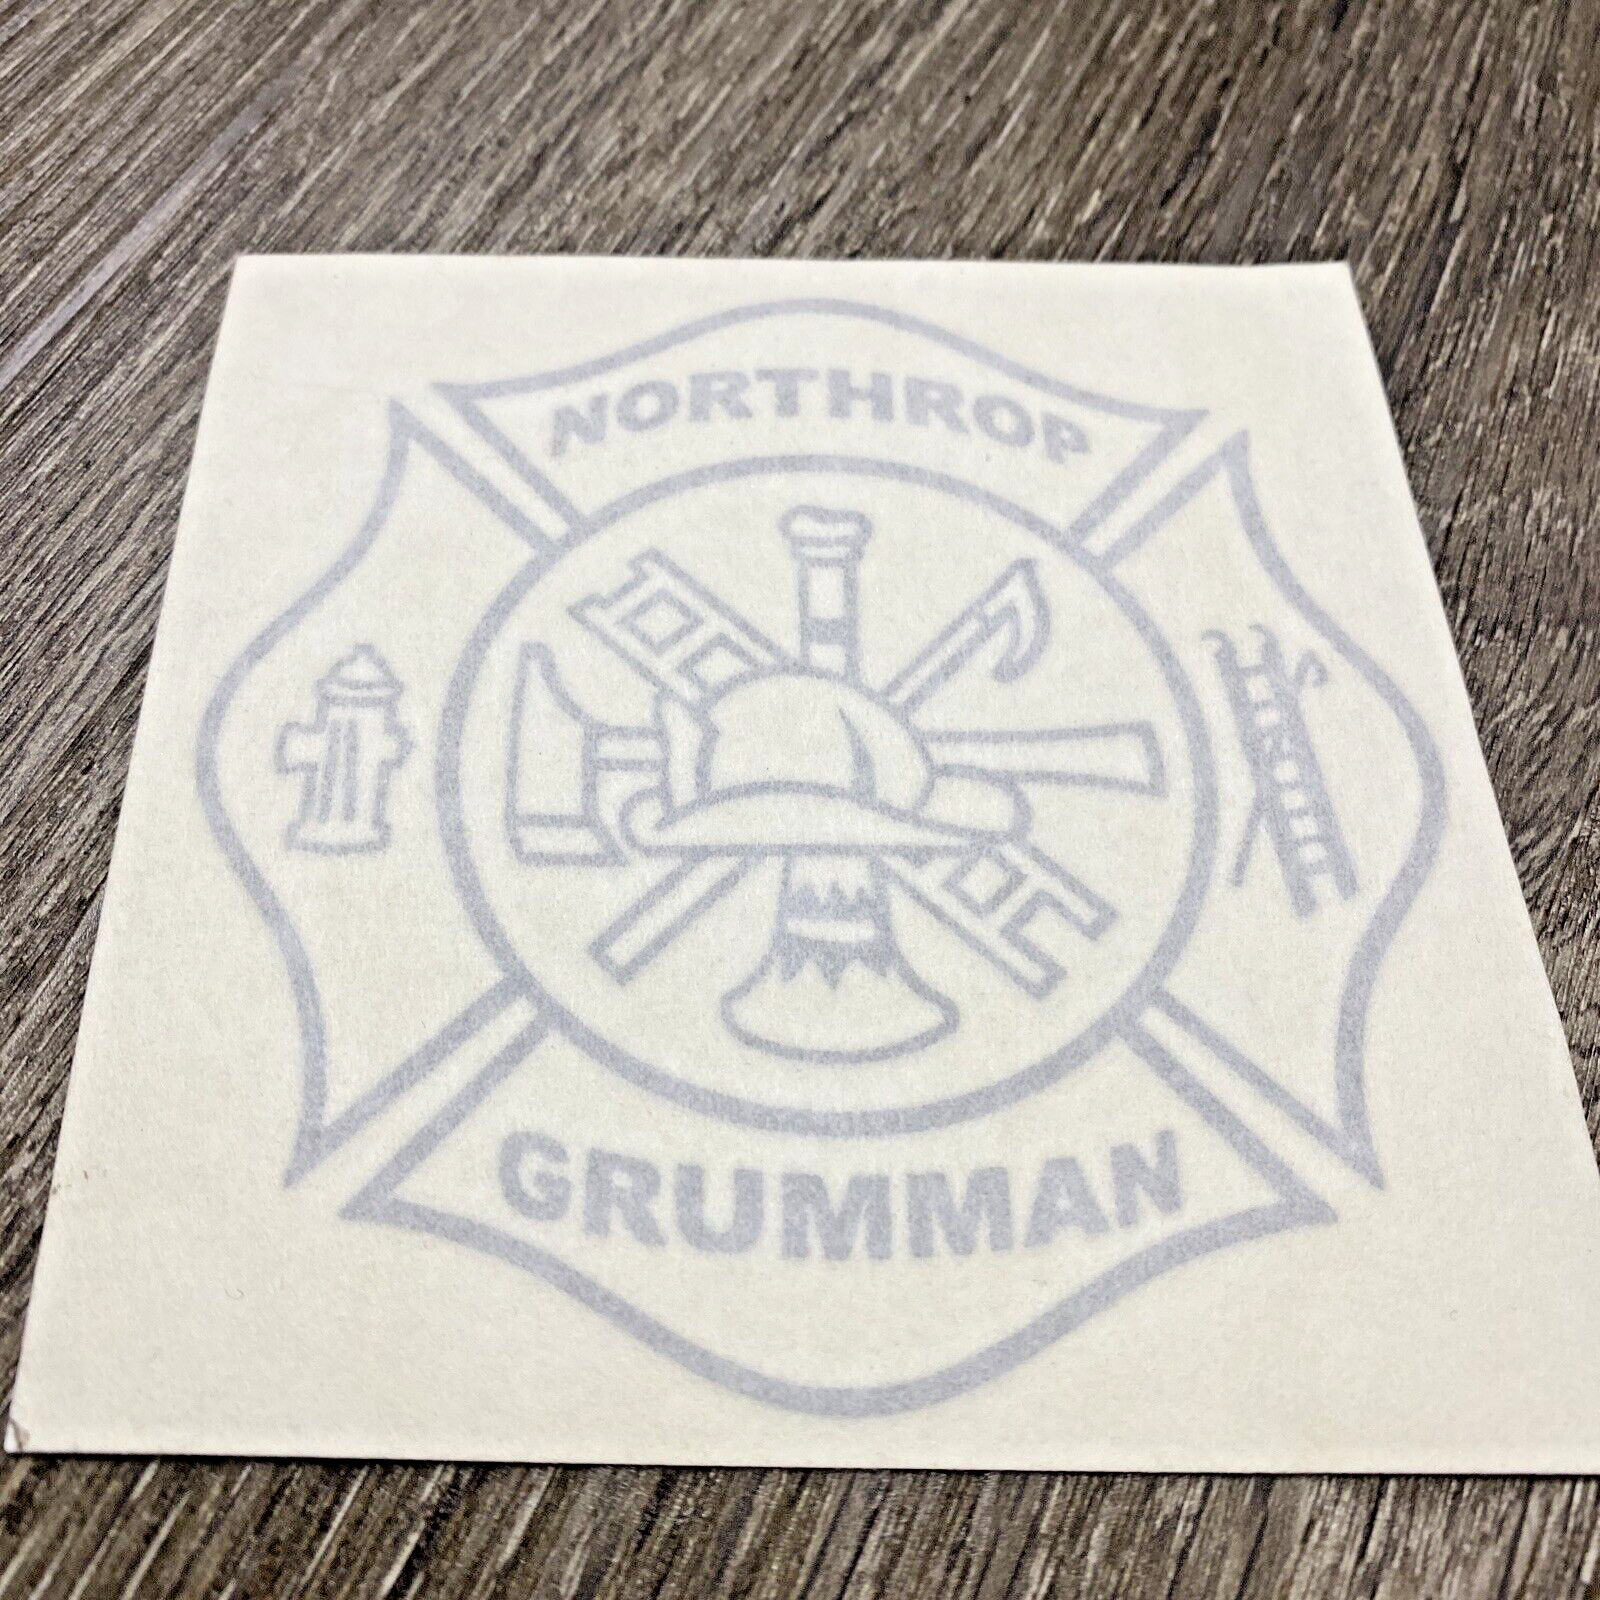 Vintage Northrop Grumman Fire Department Black Decal Sticker for Any Surfaces